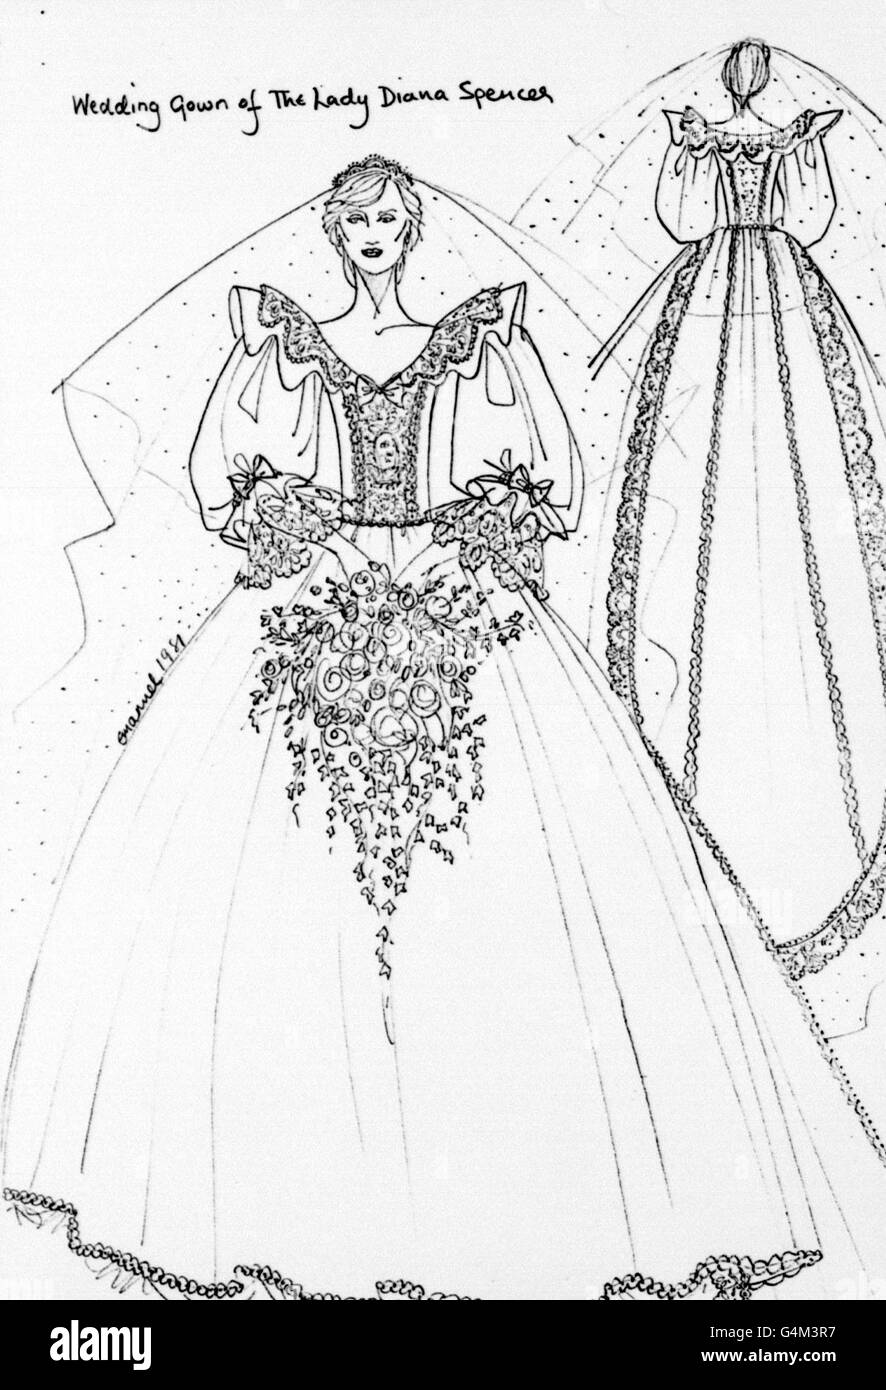 Sketches of the front and back views of the wedding dress to be worn by Lady Diana Spencer during her wedding to the Prince of Wales at St. Paul's Cathedral in London. Designed by Elizabeth and David Emanuel, the dress has a 25ft long detachable train. The bride's veil of ivory silk tulle, spangled with thousands of tiny hand-embroidered mother-of-pearl sequins, is held in place by the Spencer Family diamond tiara. The bride will also wear diamond drop ear-rings, lent by her mother. Stock Photo